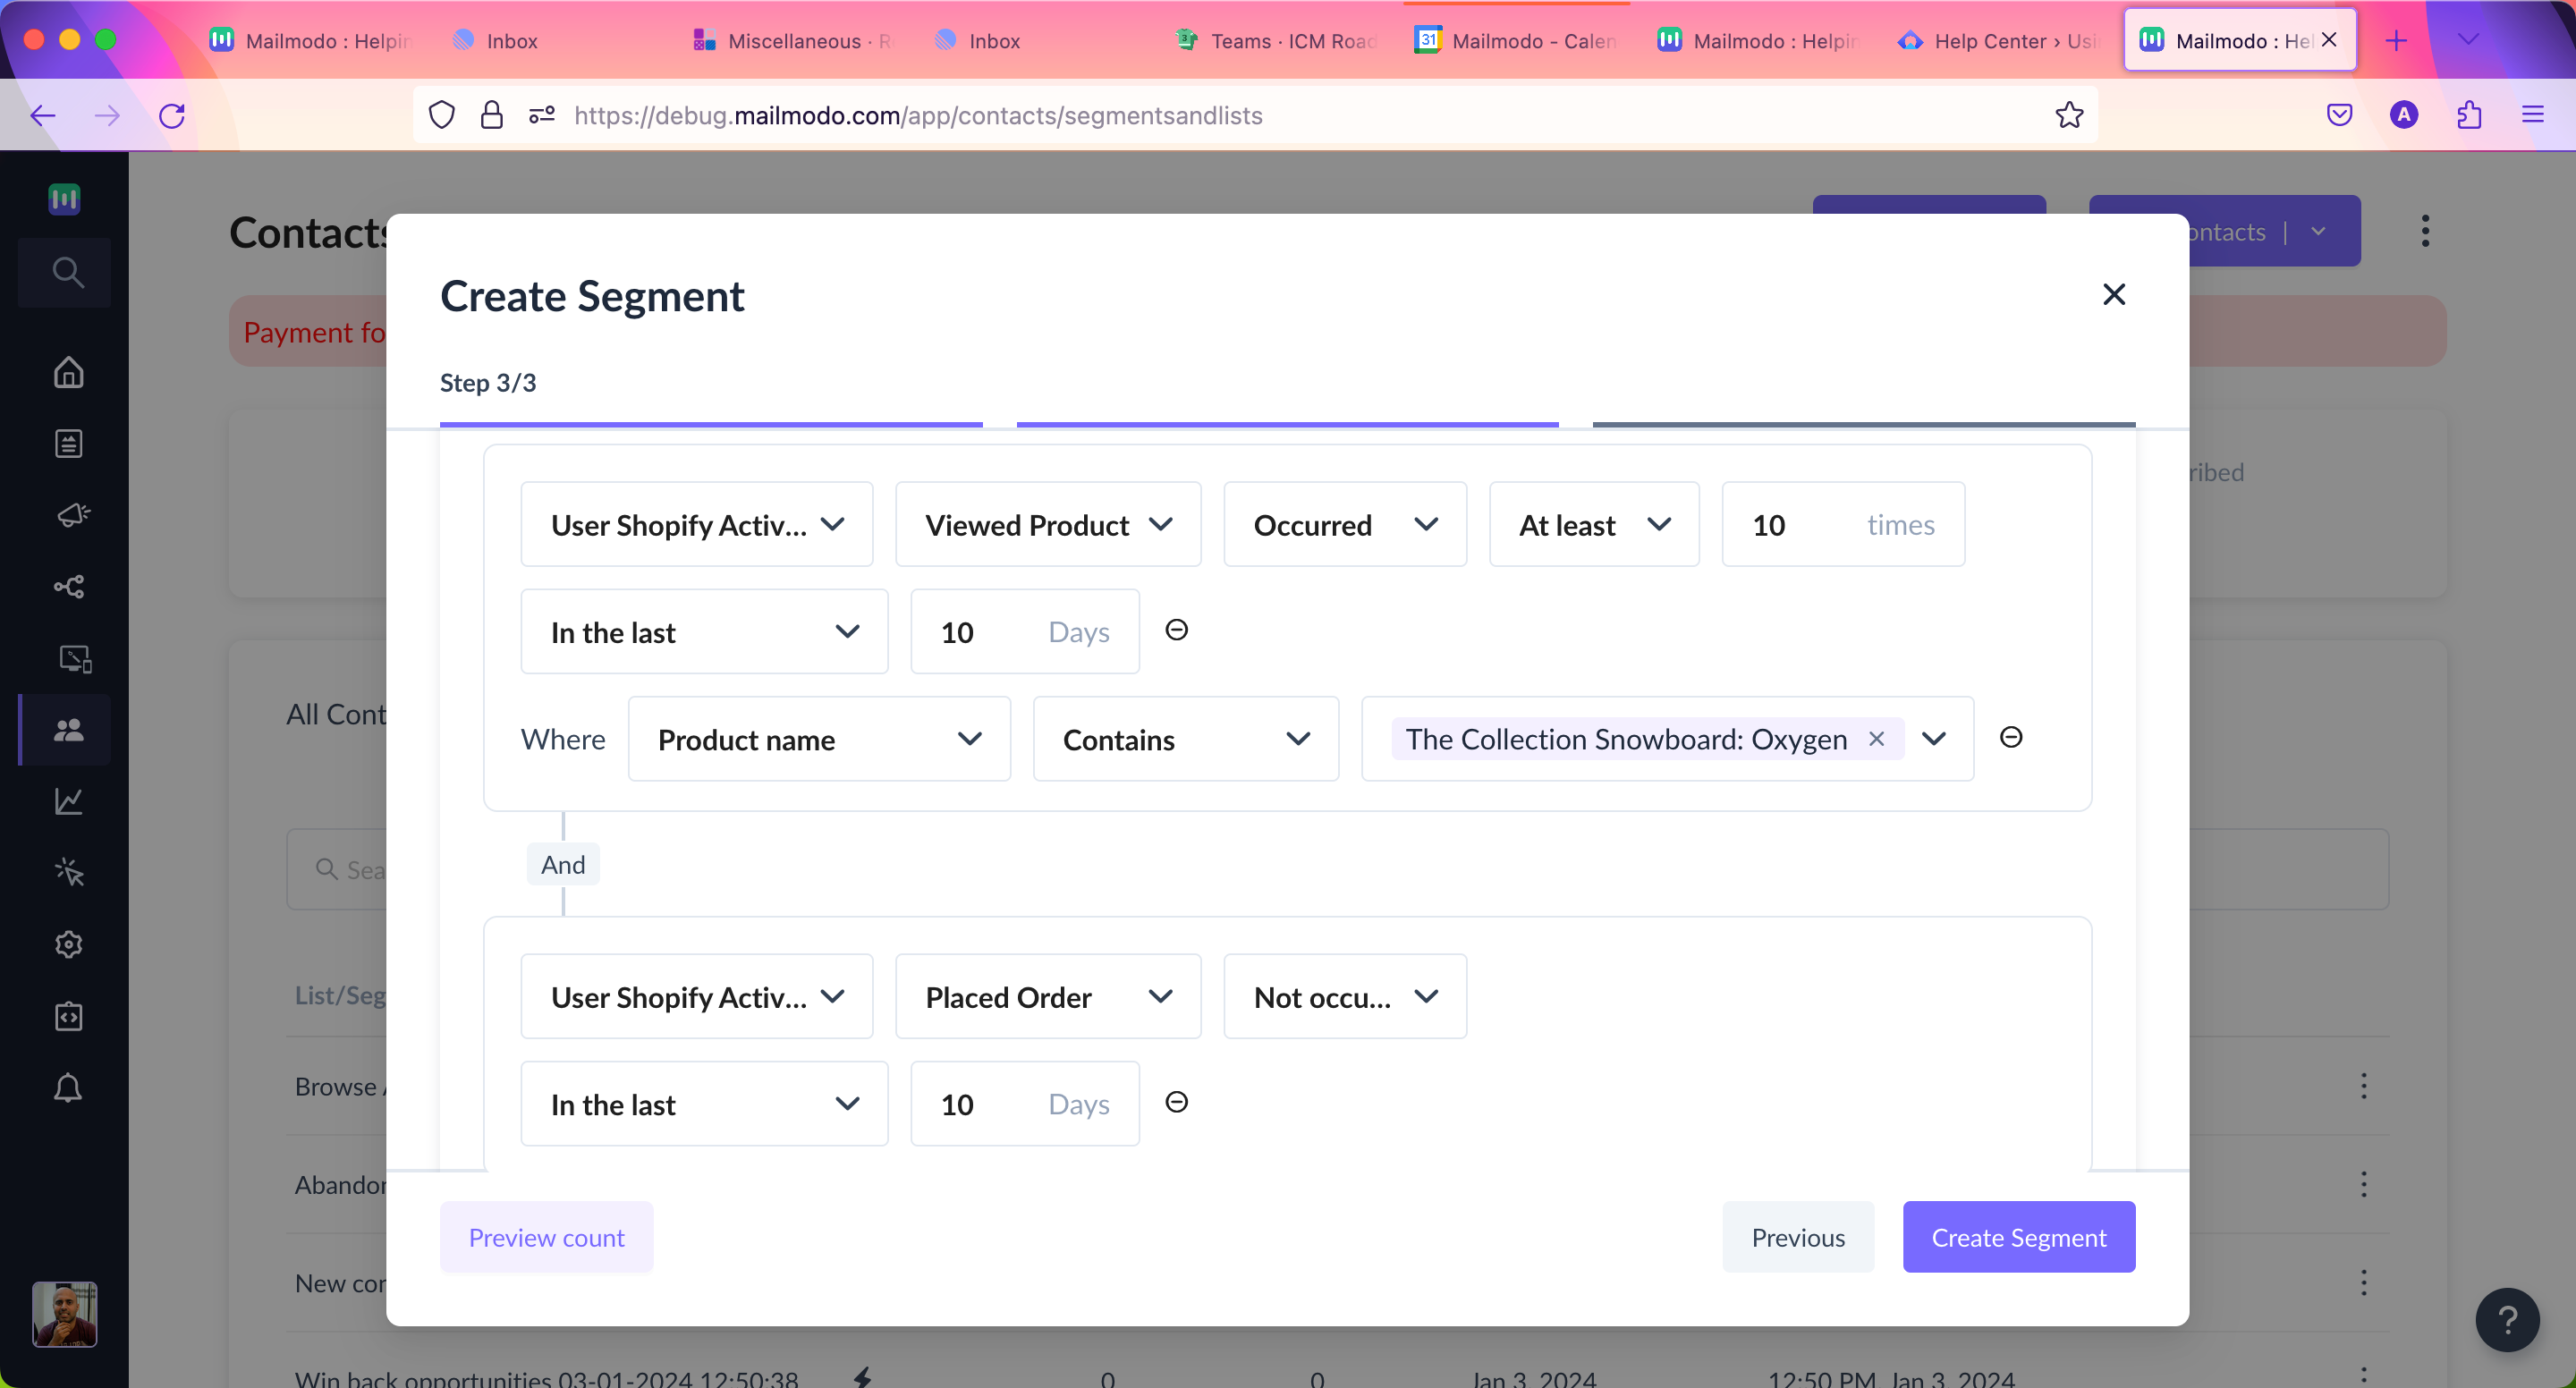 Using Shopify activities for segmentation